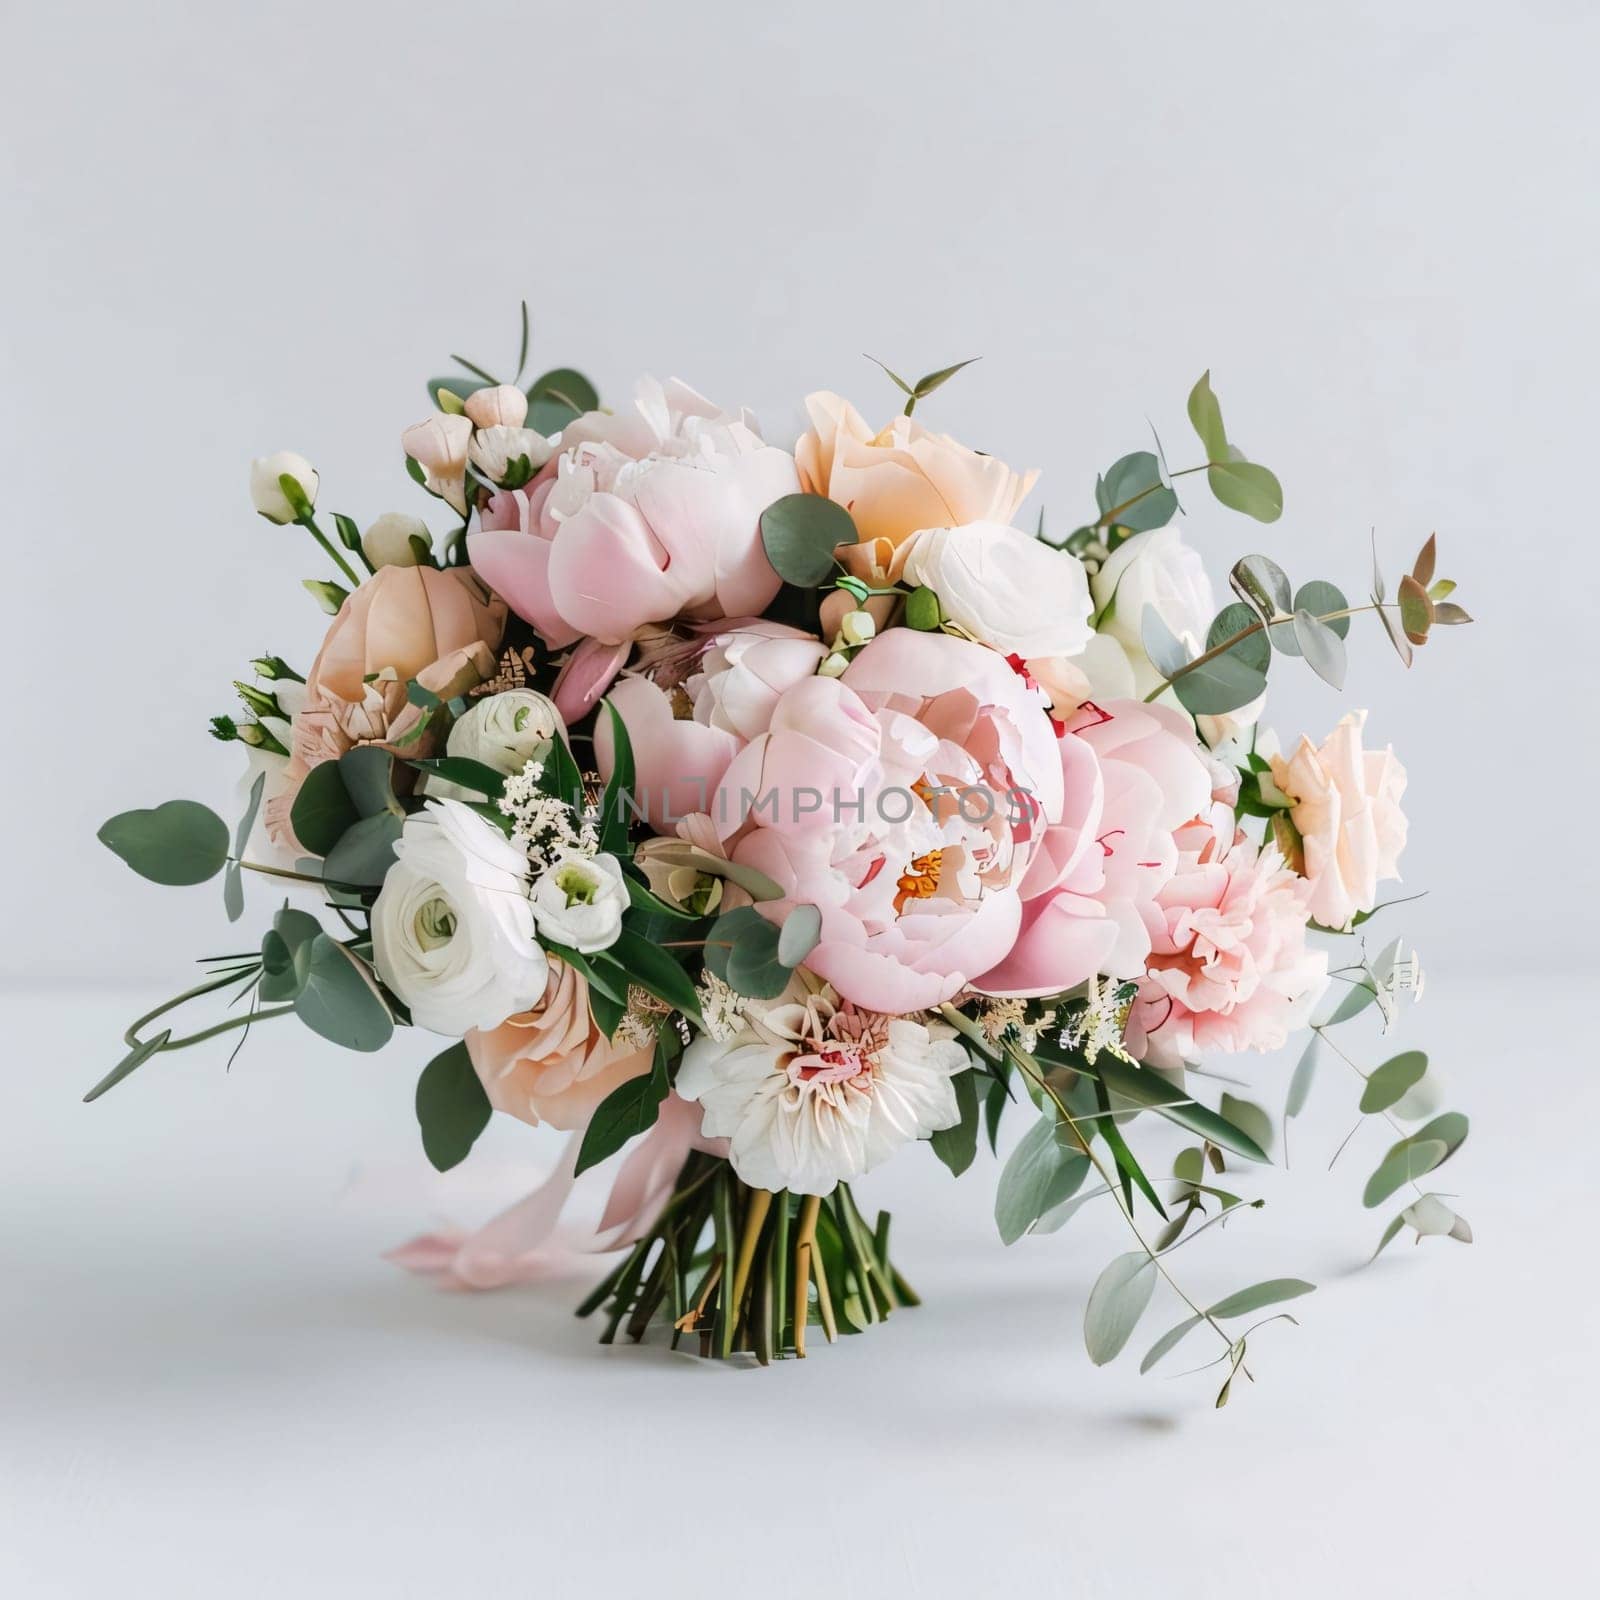 Bouquet of white and pink flowers with green leaves on a light background. Flowering flowers, a symbol of spring, new life. A joyful time of nature waking up to life.